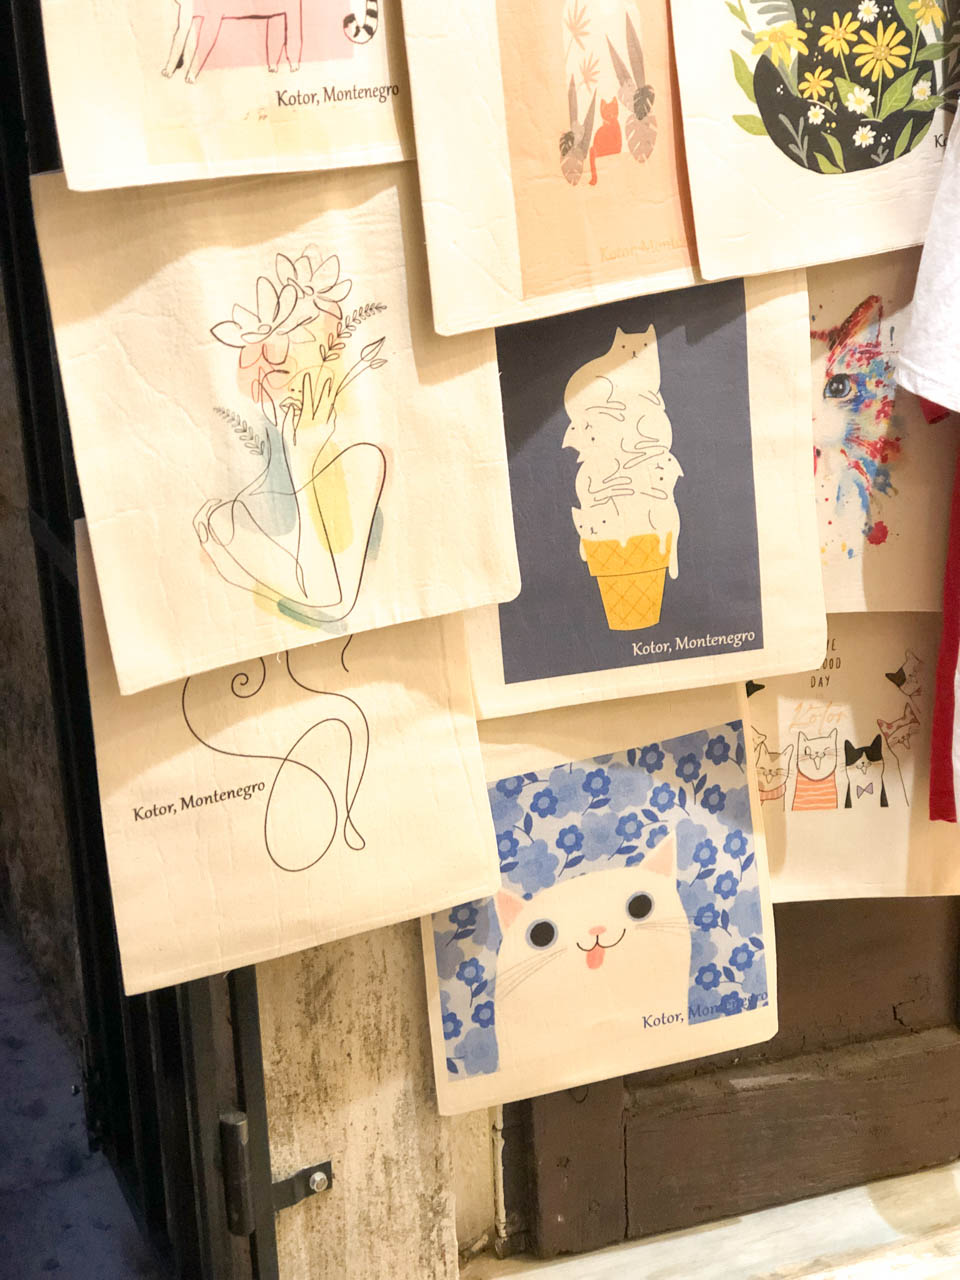 Hand painted flower and cat illustrations inside a shop in Kotor Old Town